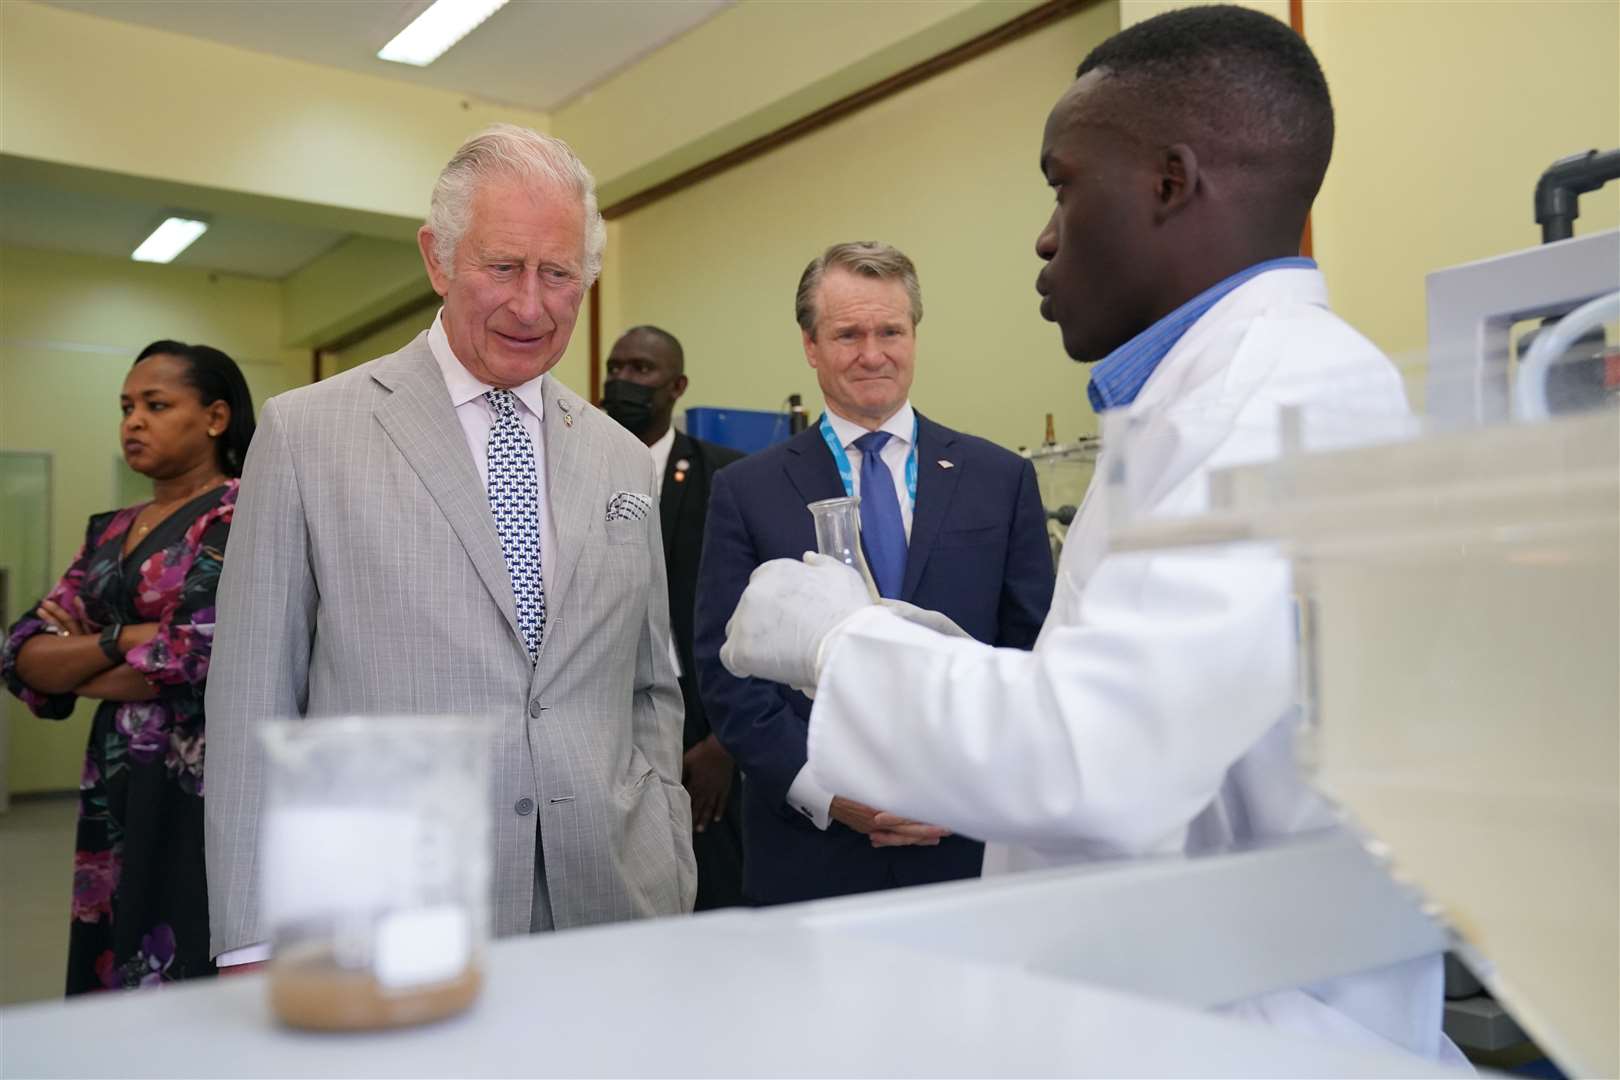 The Prince of Wales speaks to students during a visit to the Integrated Polytechnic Regional College (IPRC) in Kigali (Jonathan Brady/PA)